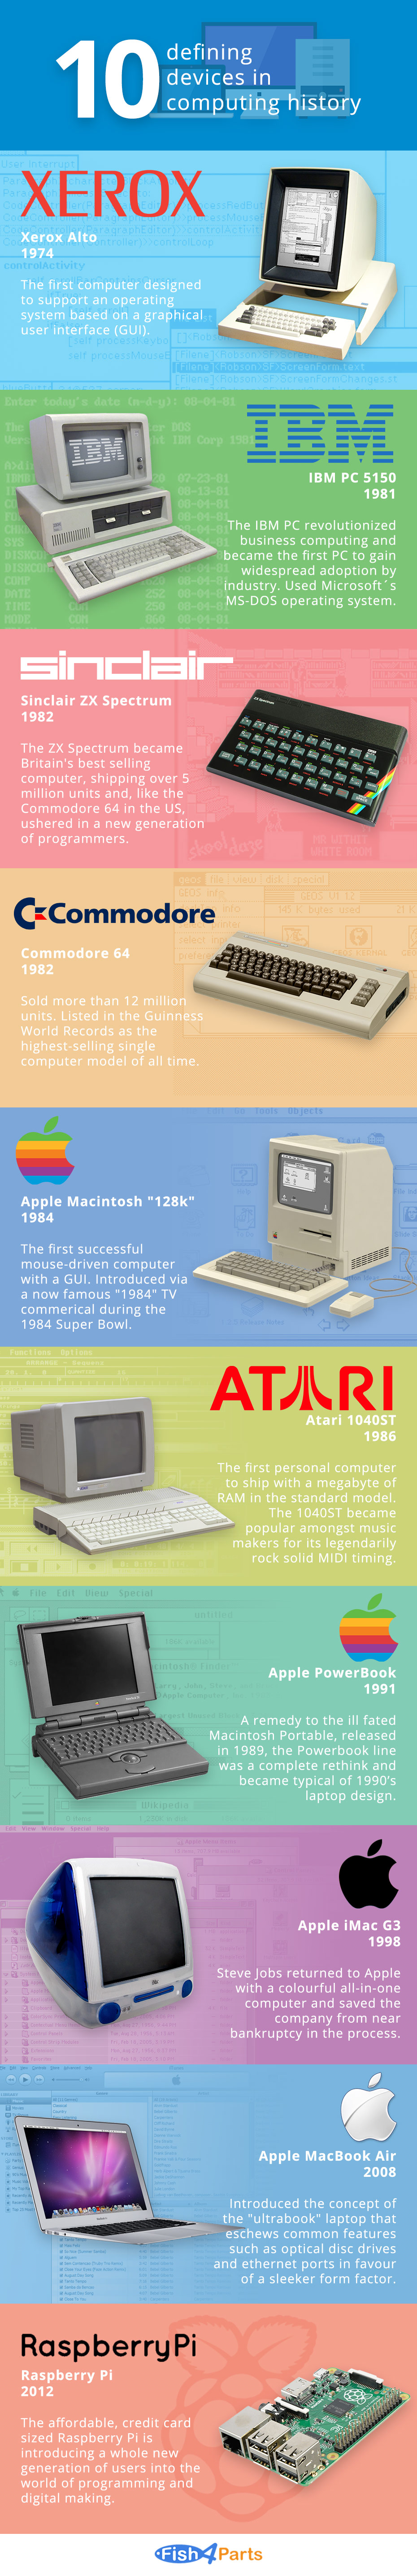 10 Defining Devices in Computing History